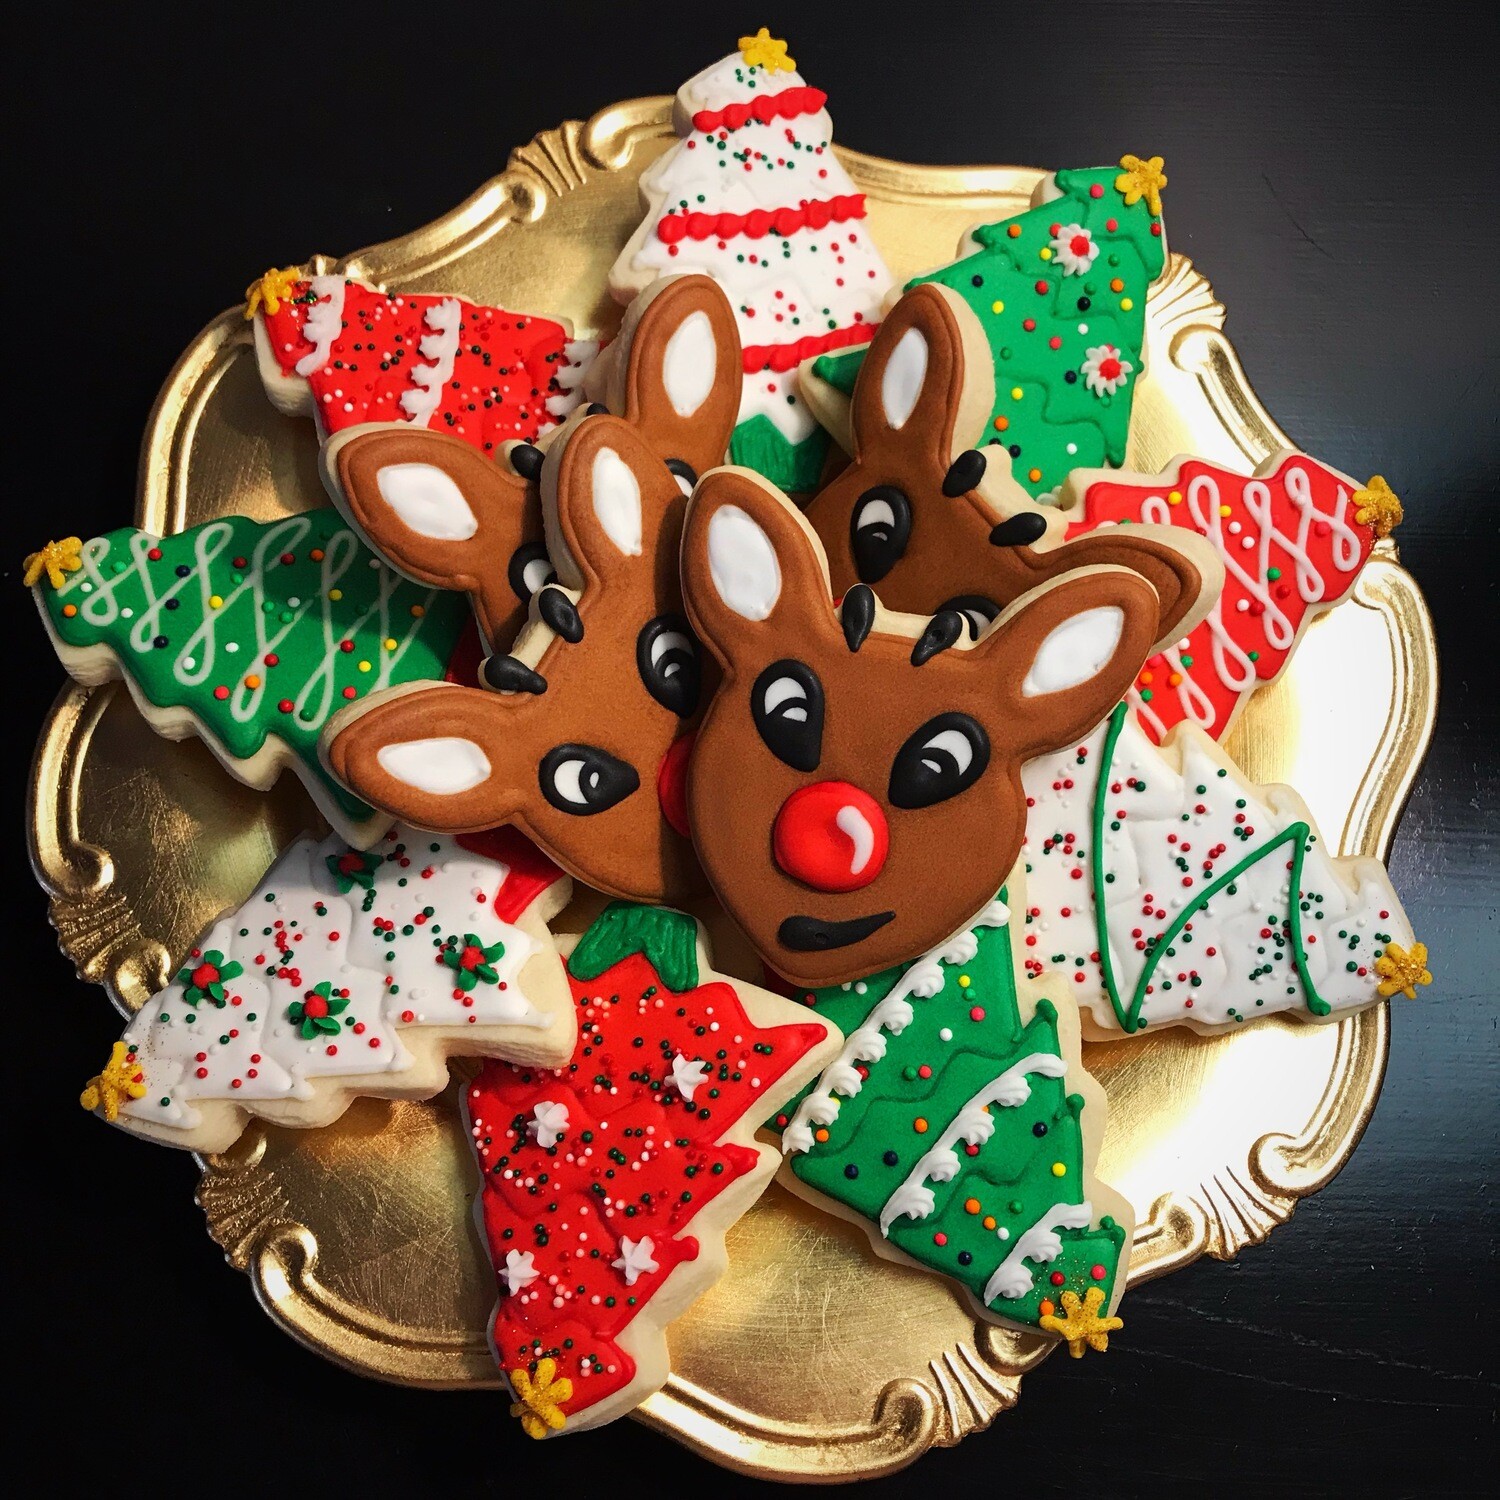 'Rudolph Christmas' Decorating Workshop - MONDAY, DECEMBER 23rd at 6:30 p.m. (THE COOKIE DECORATING STUDIO)